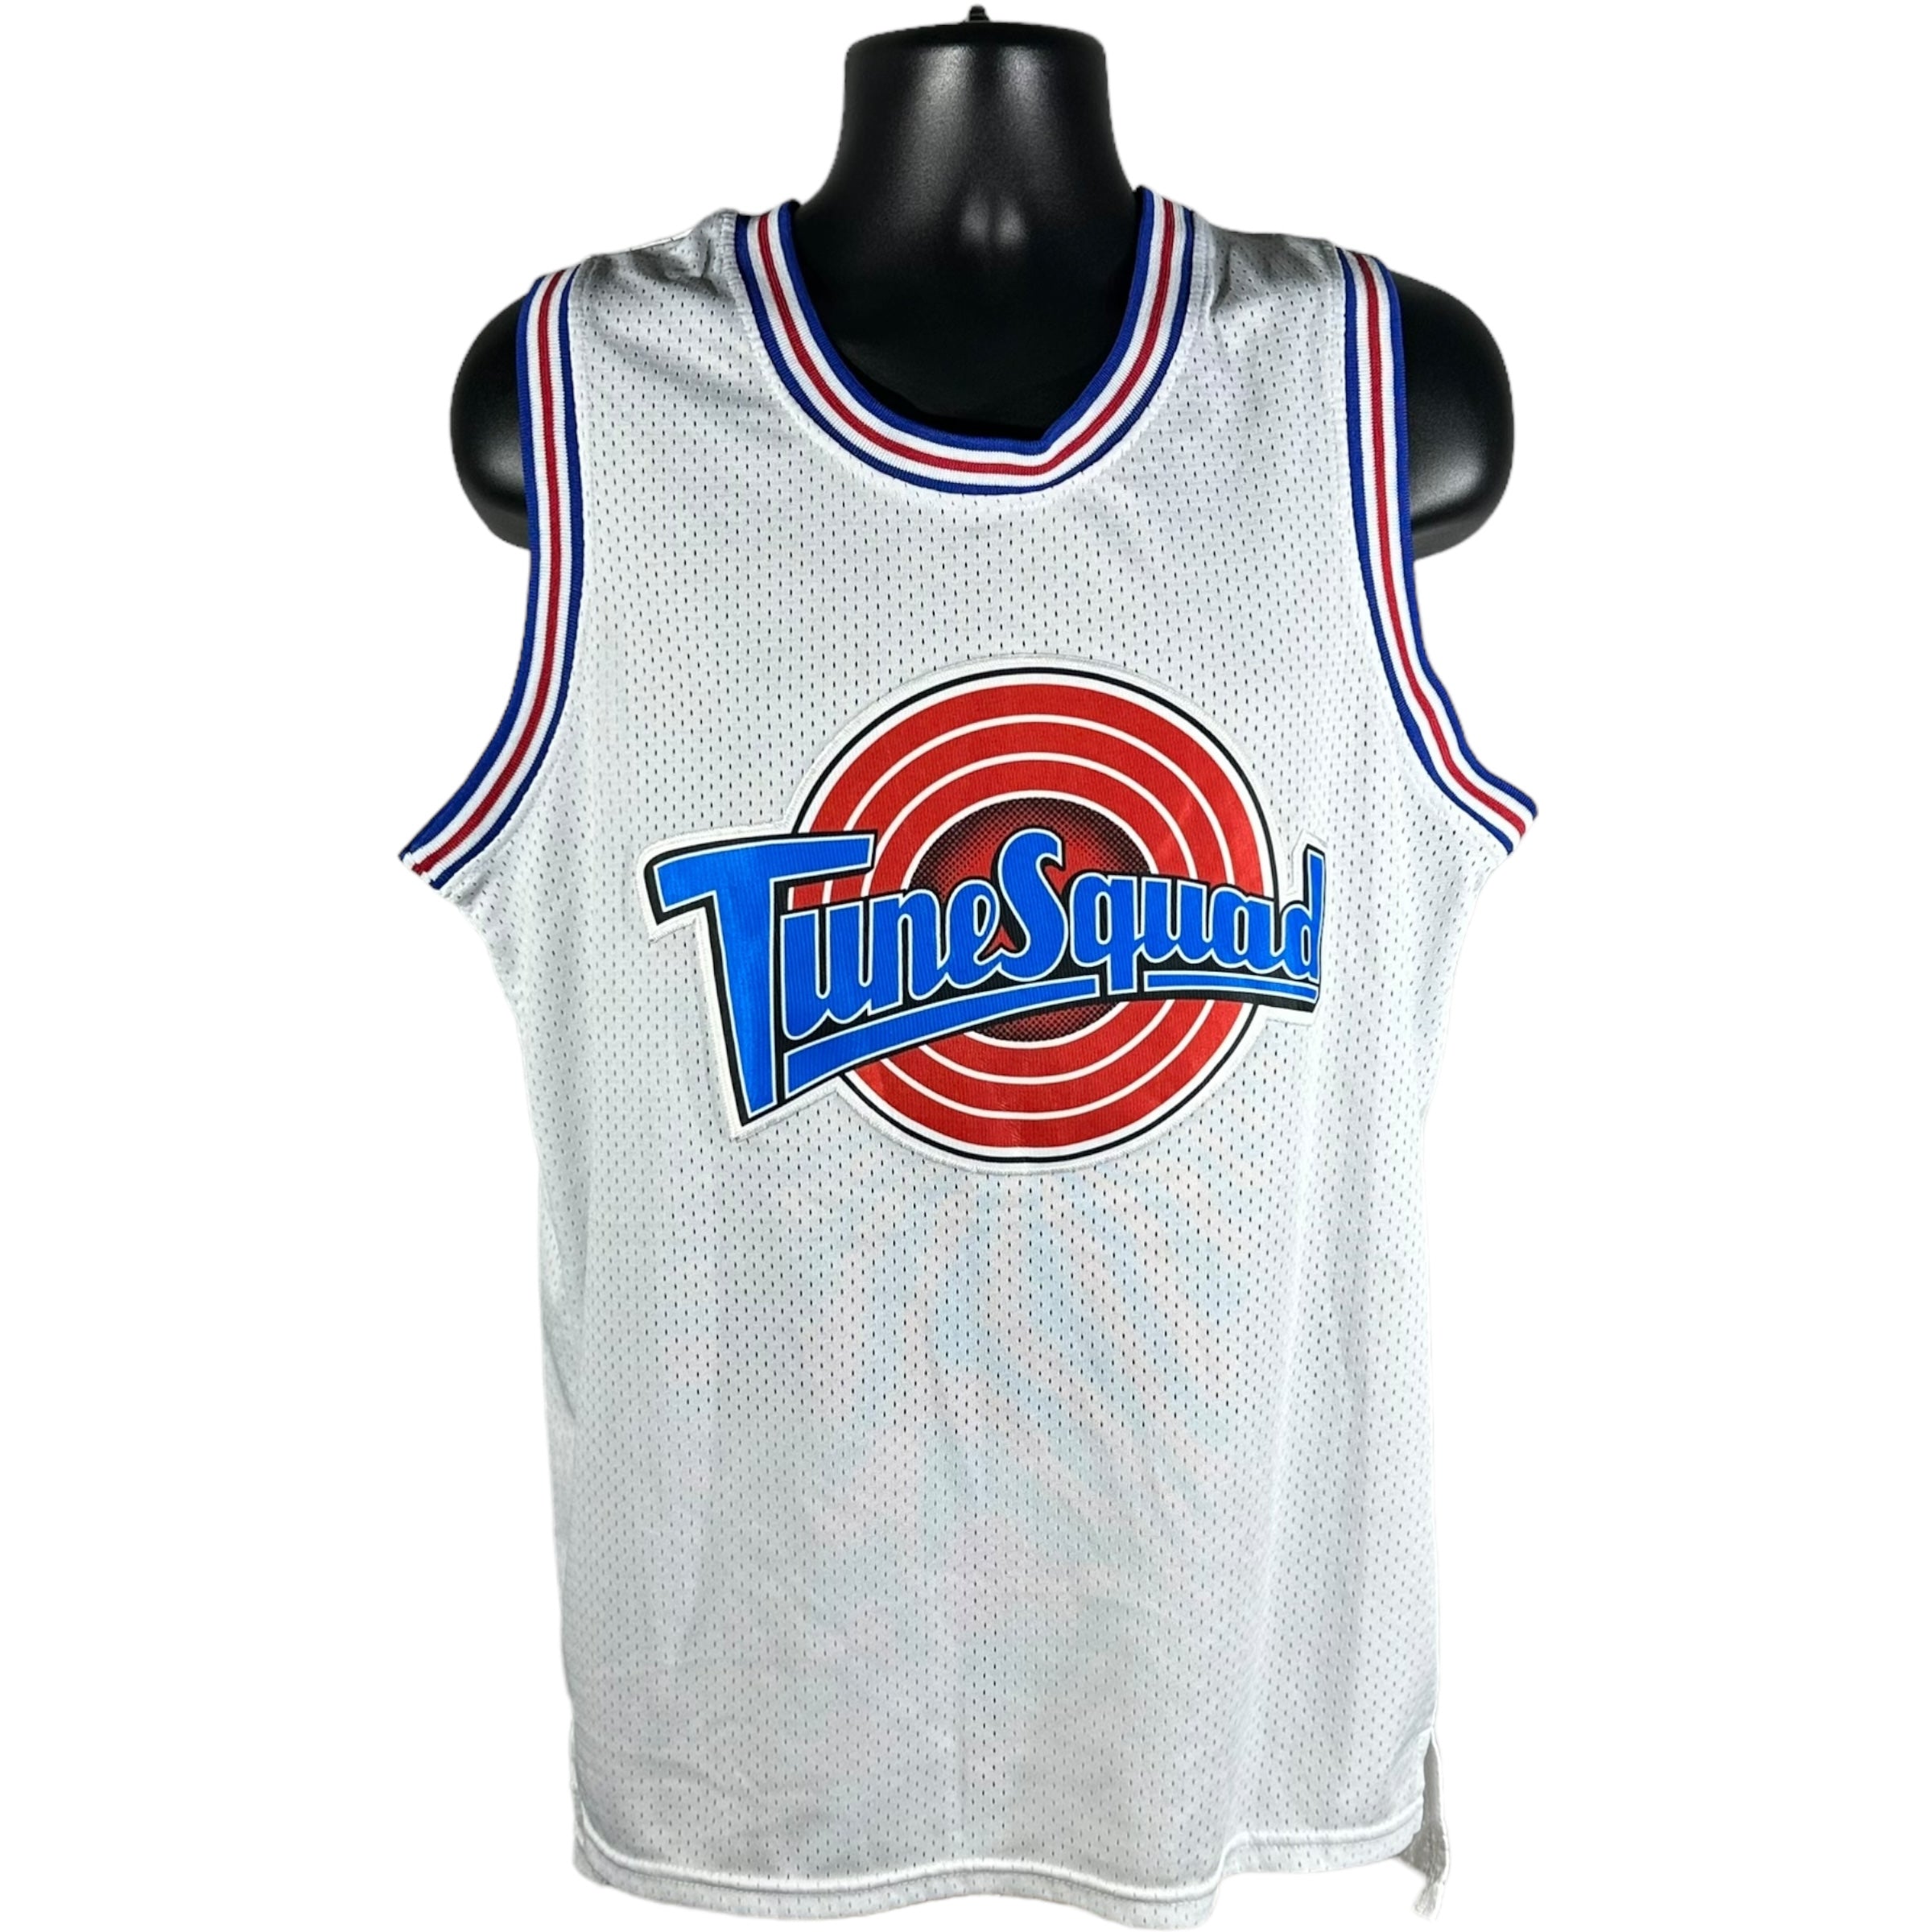 Vintage Tune Squad #1 Bugs Bunny Jersey